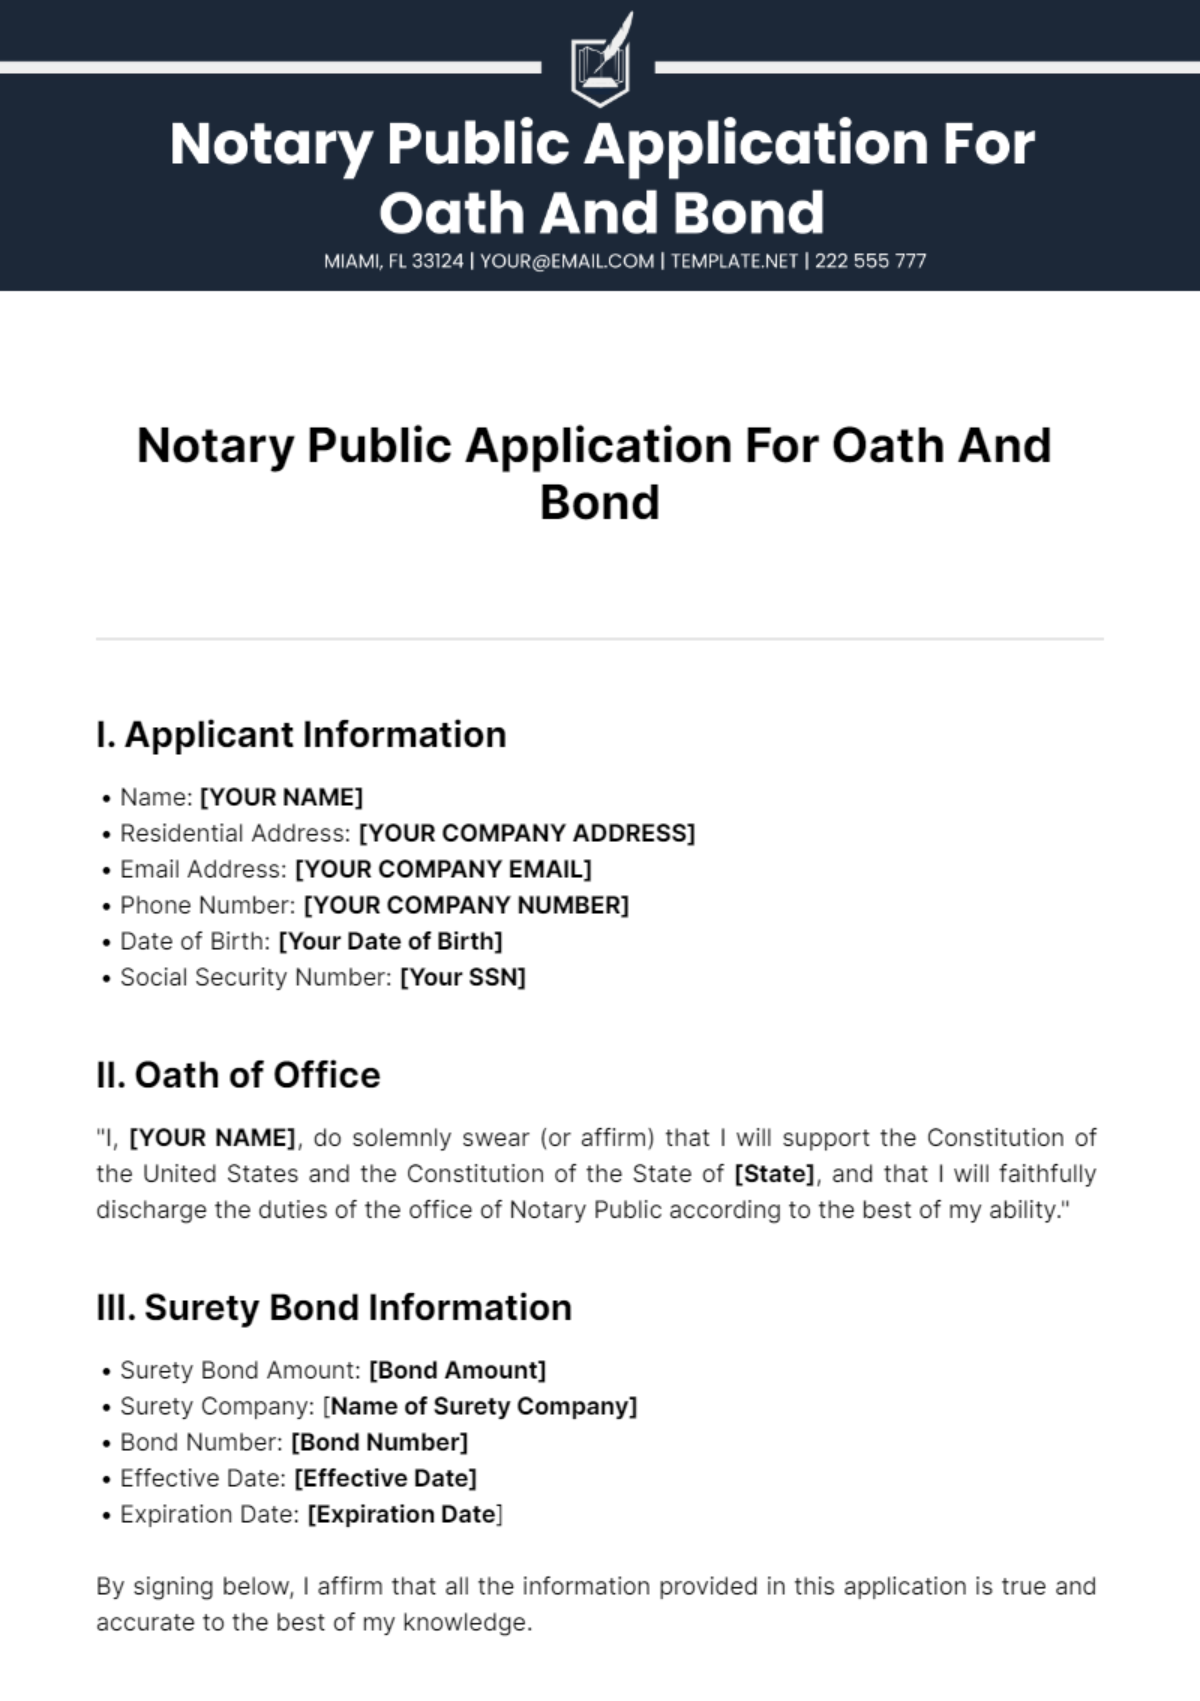 Notary Public Application For Oath And Bond Template